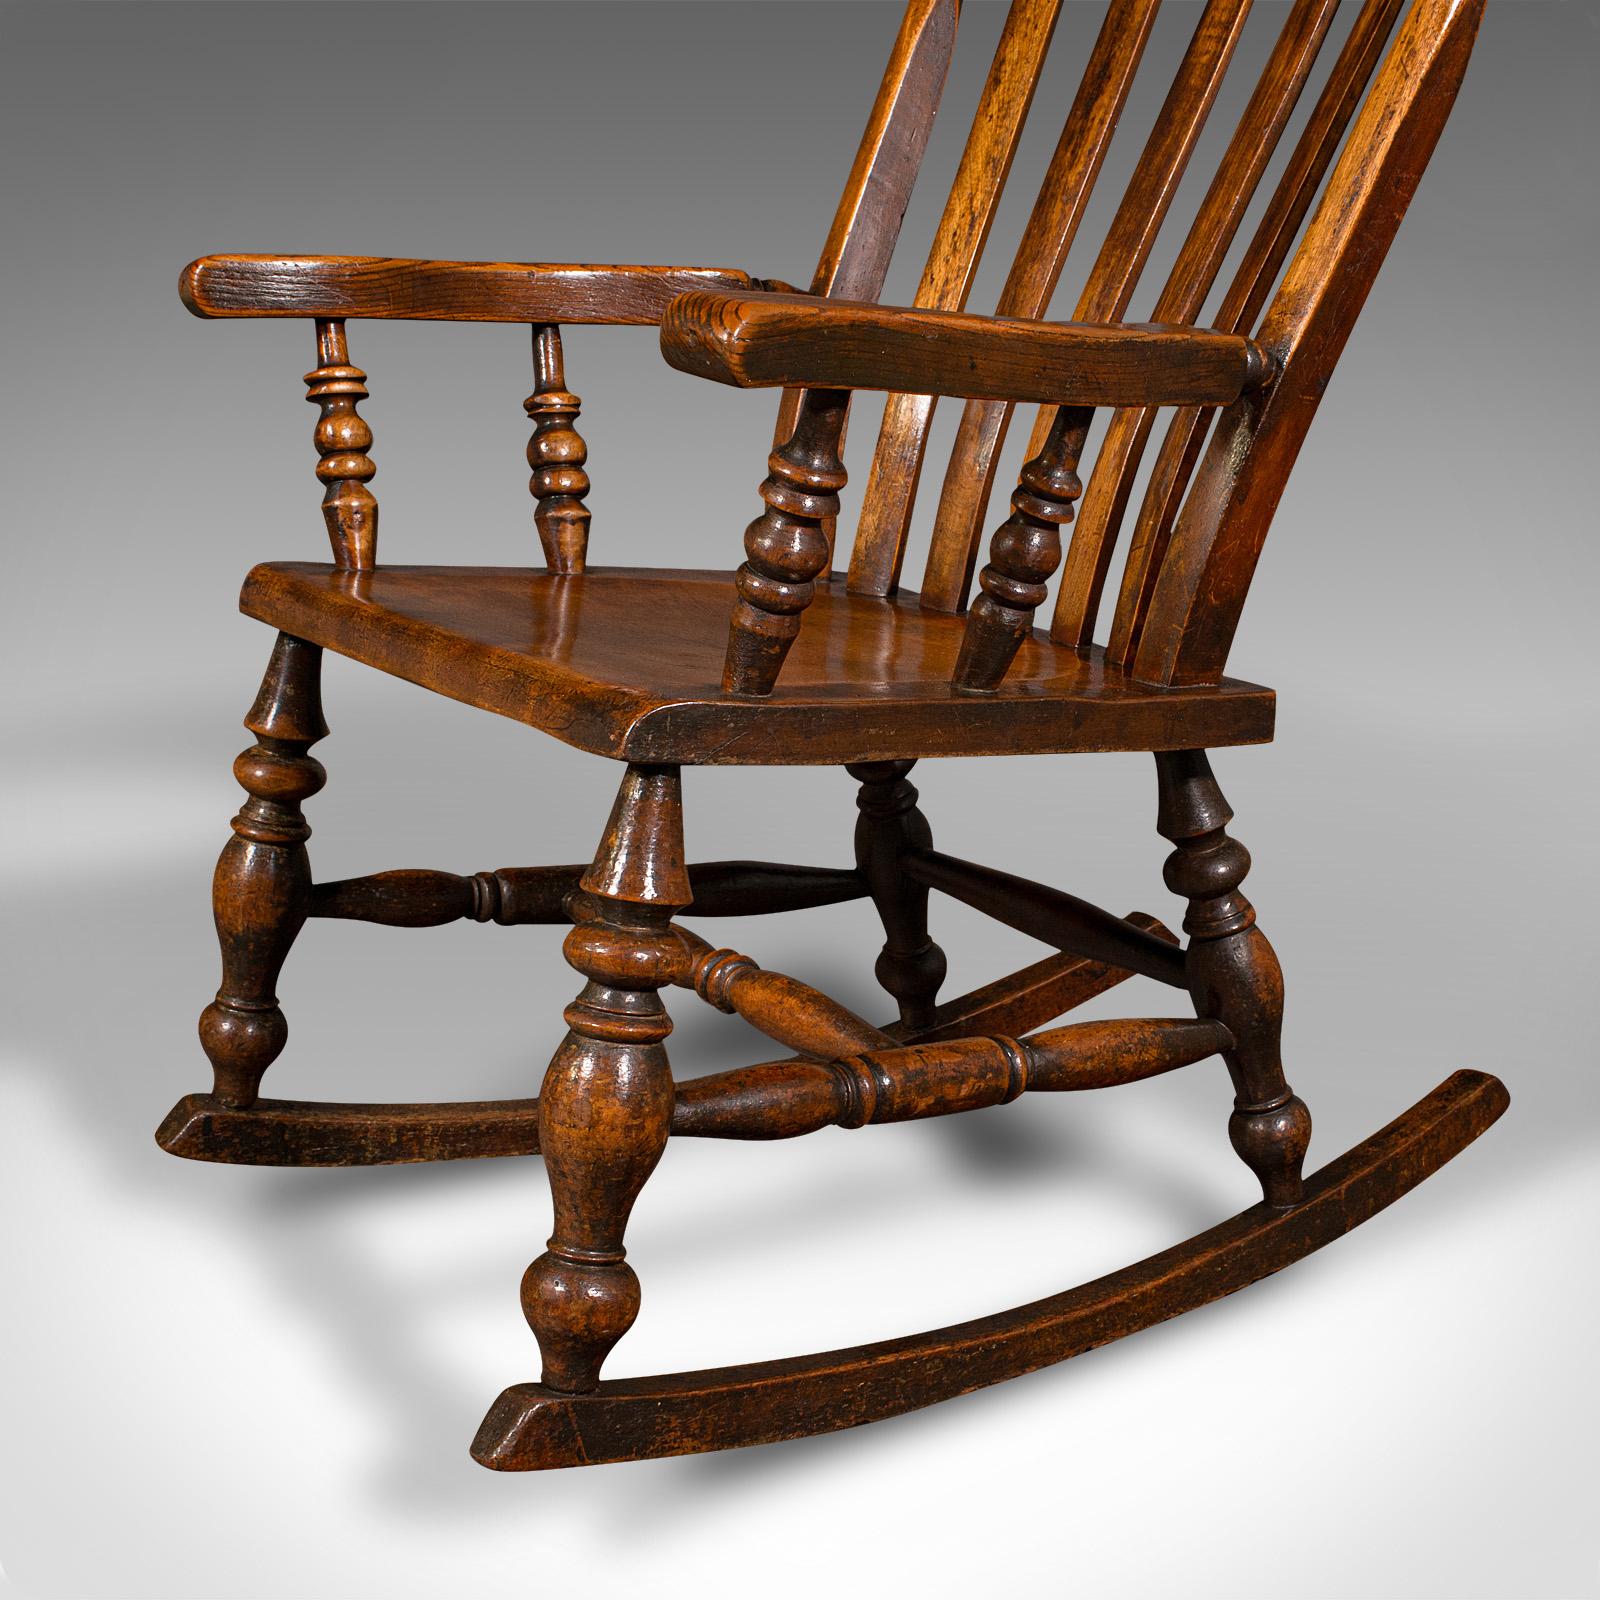 Antique Lath Back Rocking Chair, English Elm, Beech, Elbow Seat, Victorian, 1880 For Sale 7